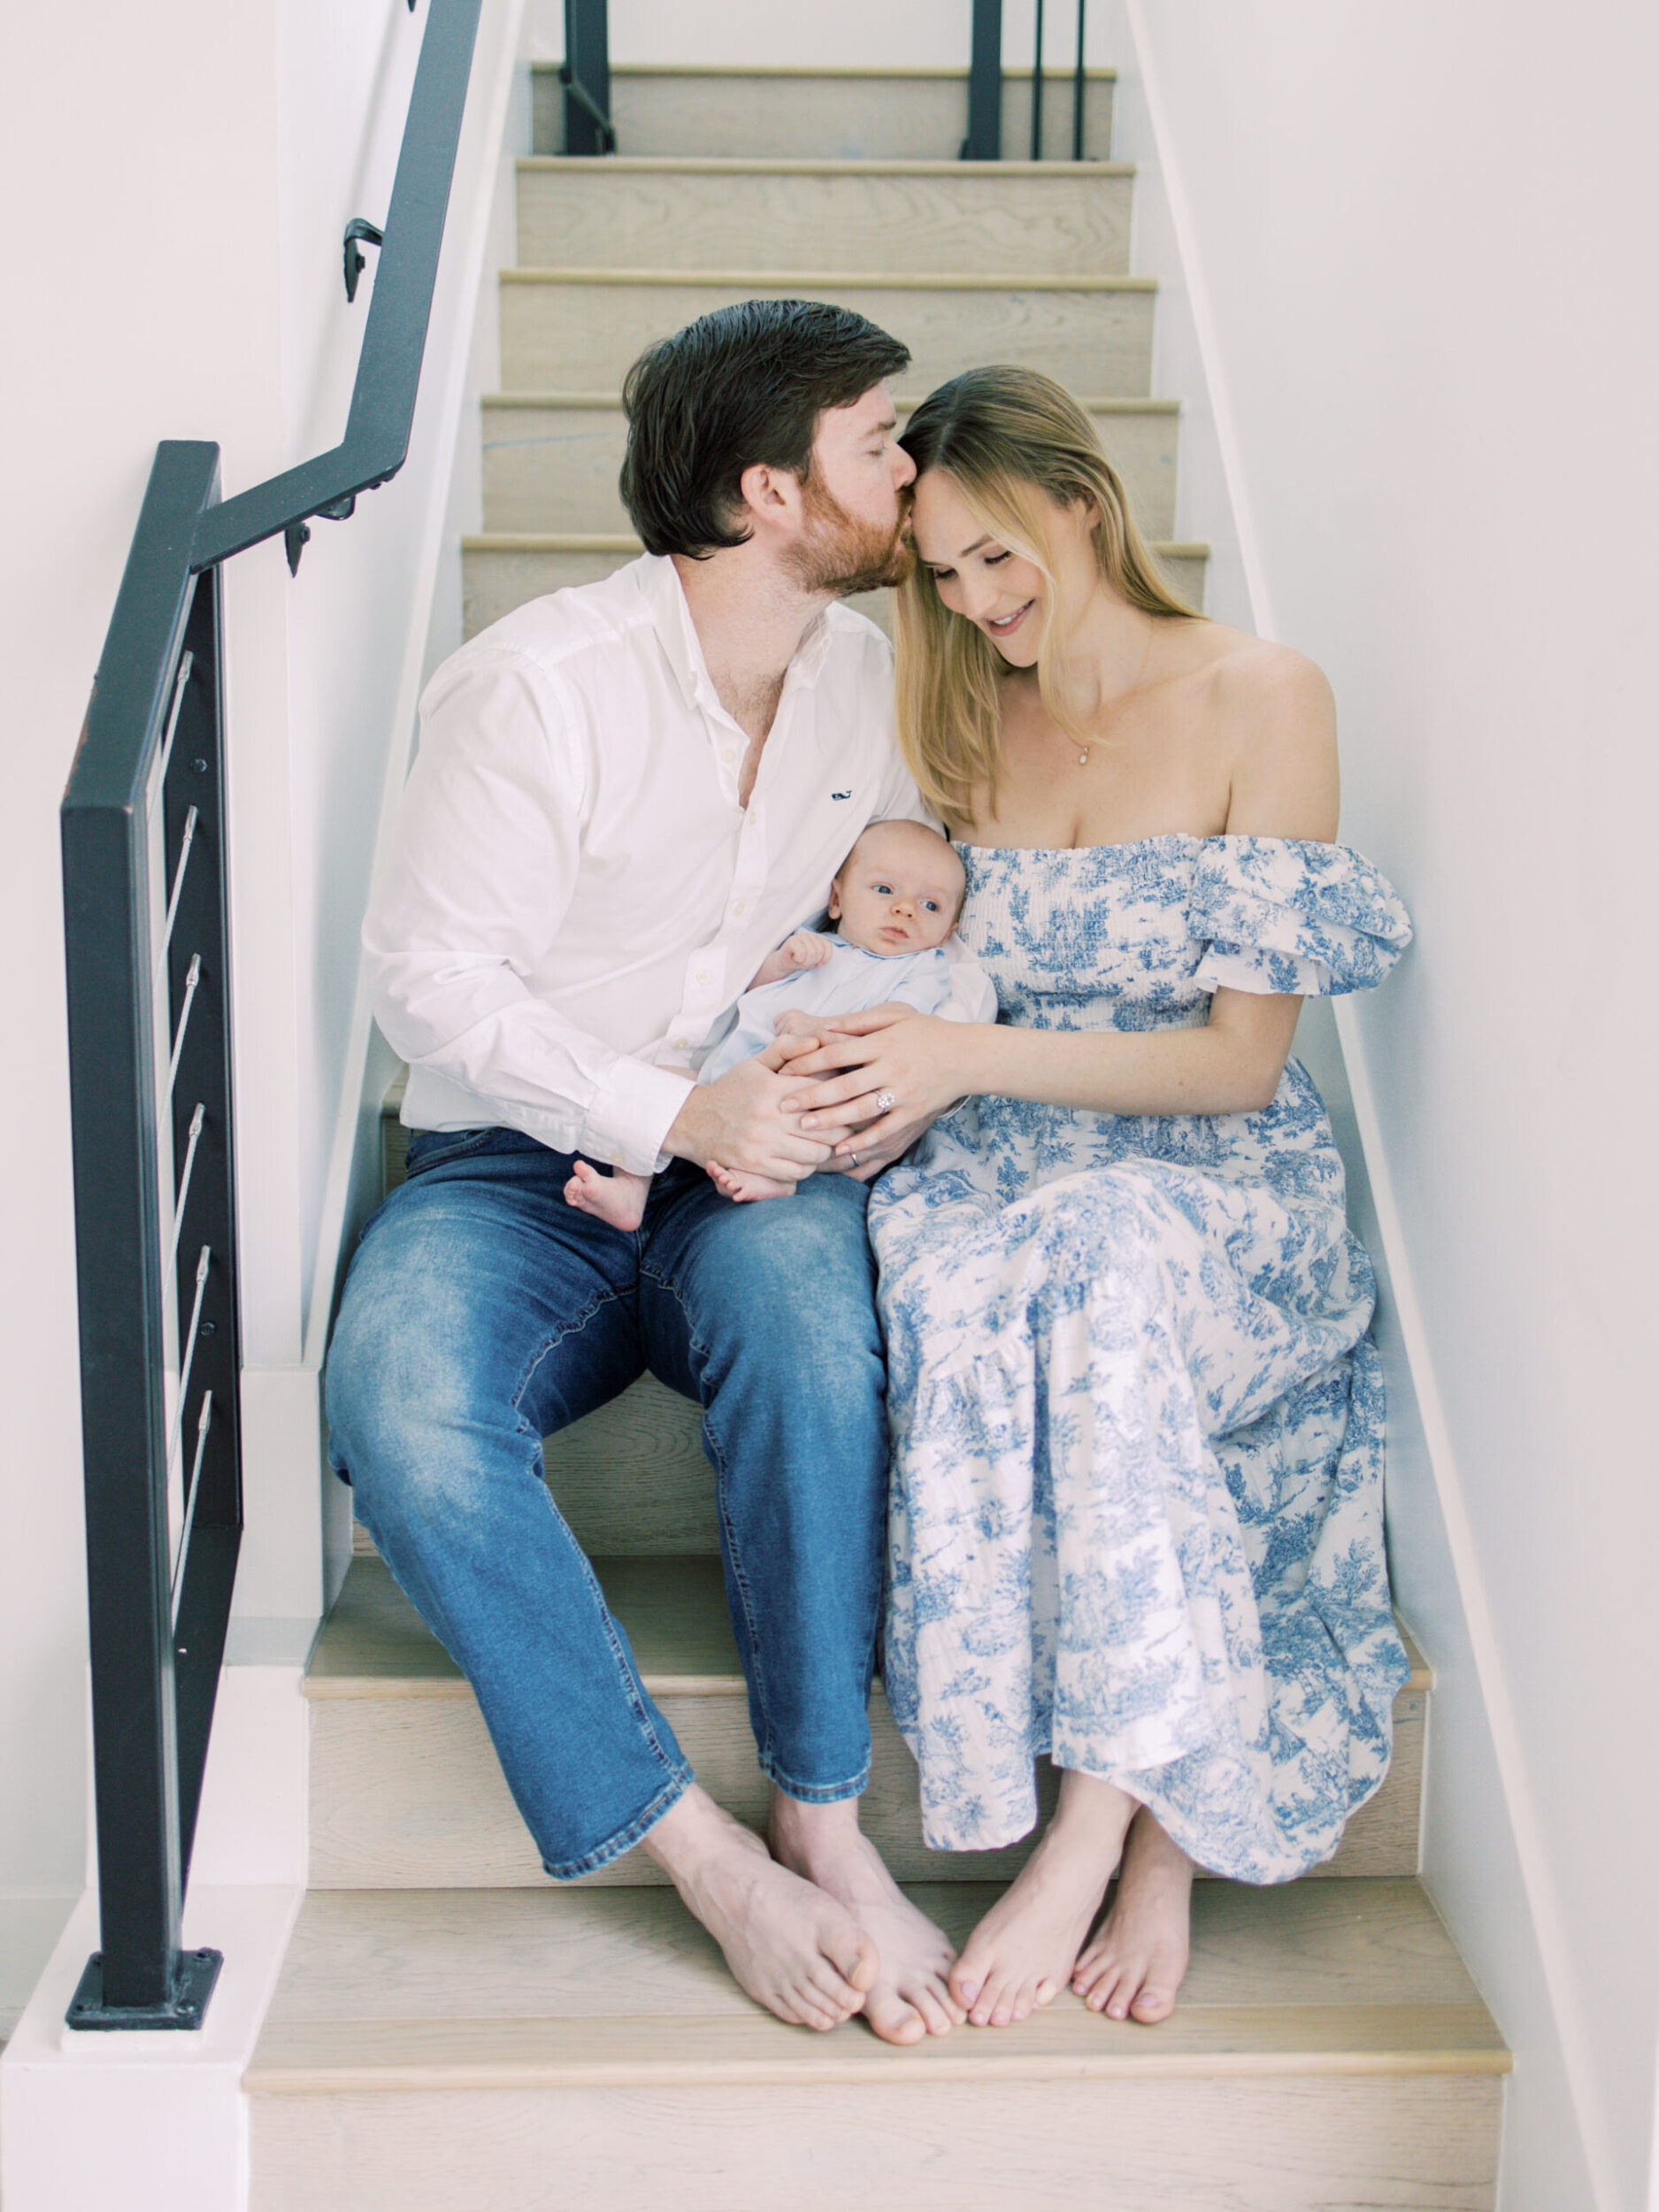 Husband gently kisses wife on head as they hold their newborn on the stairs.